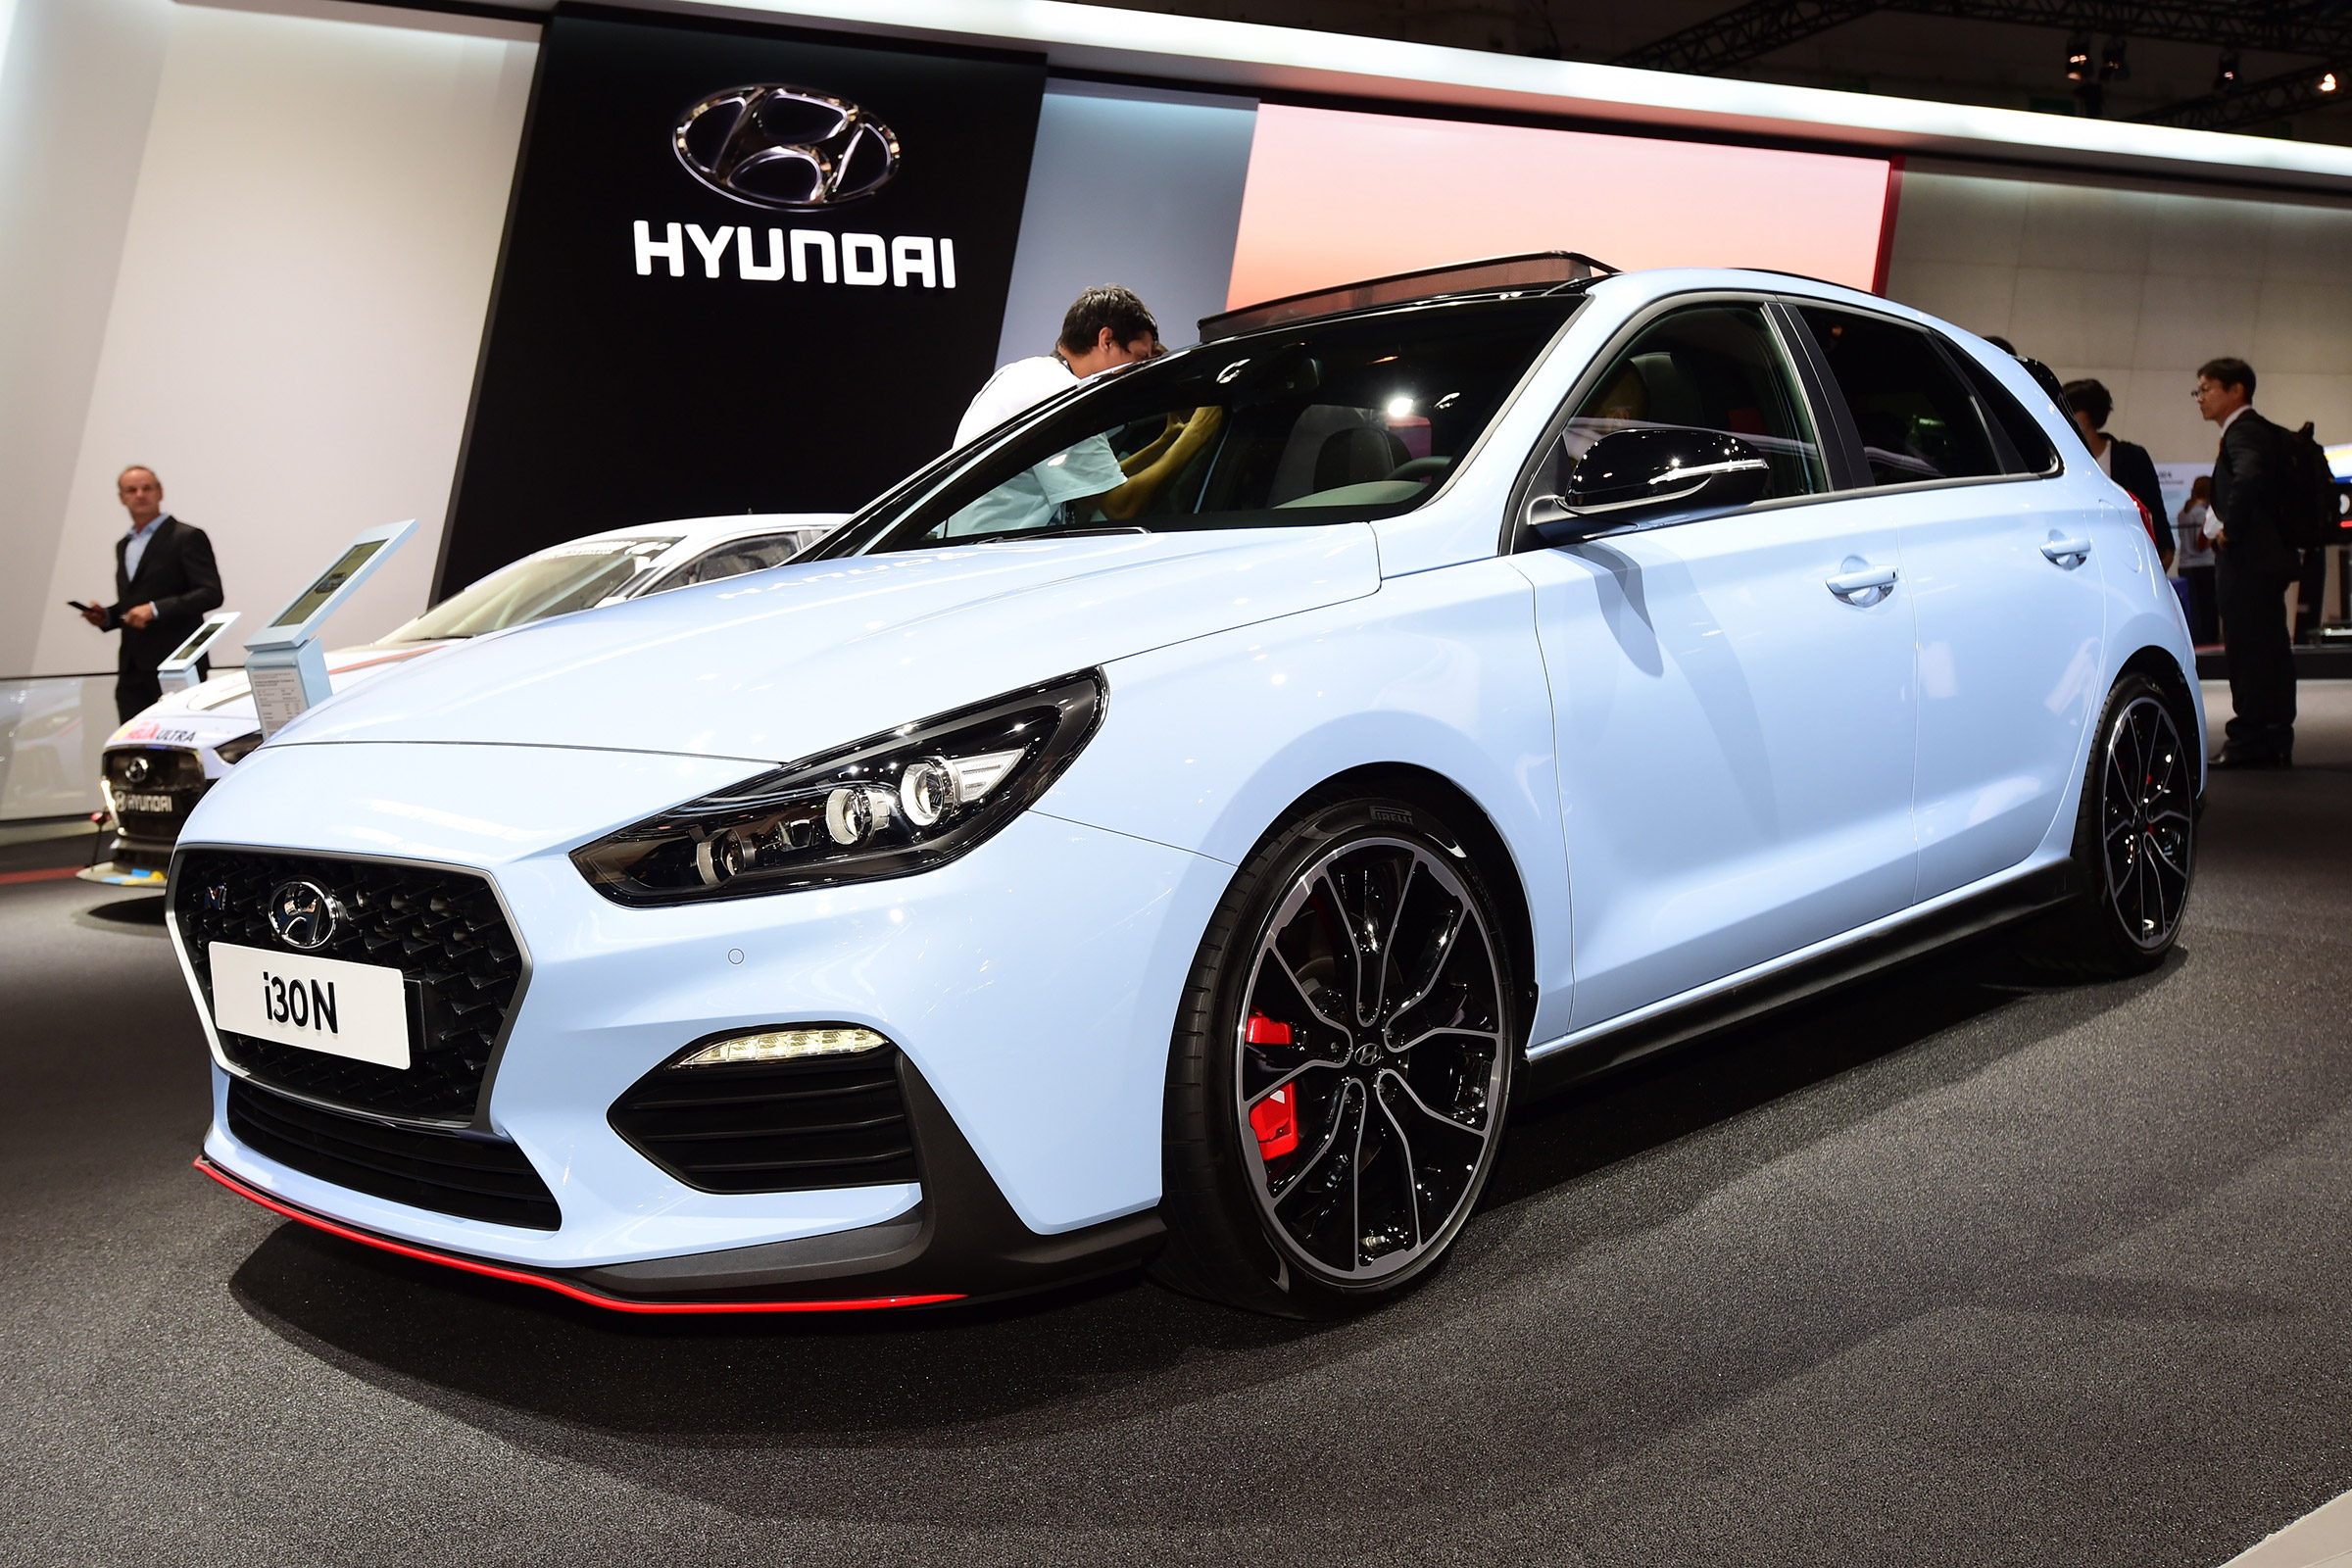 New 2018 Hyundai I30 N Uk Prices And Specs Revealed For Hyundais Hot